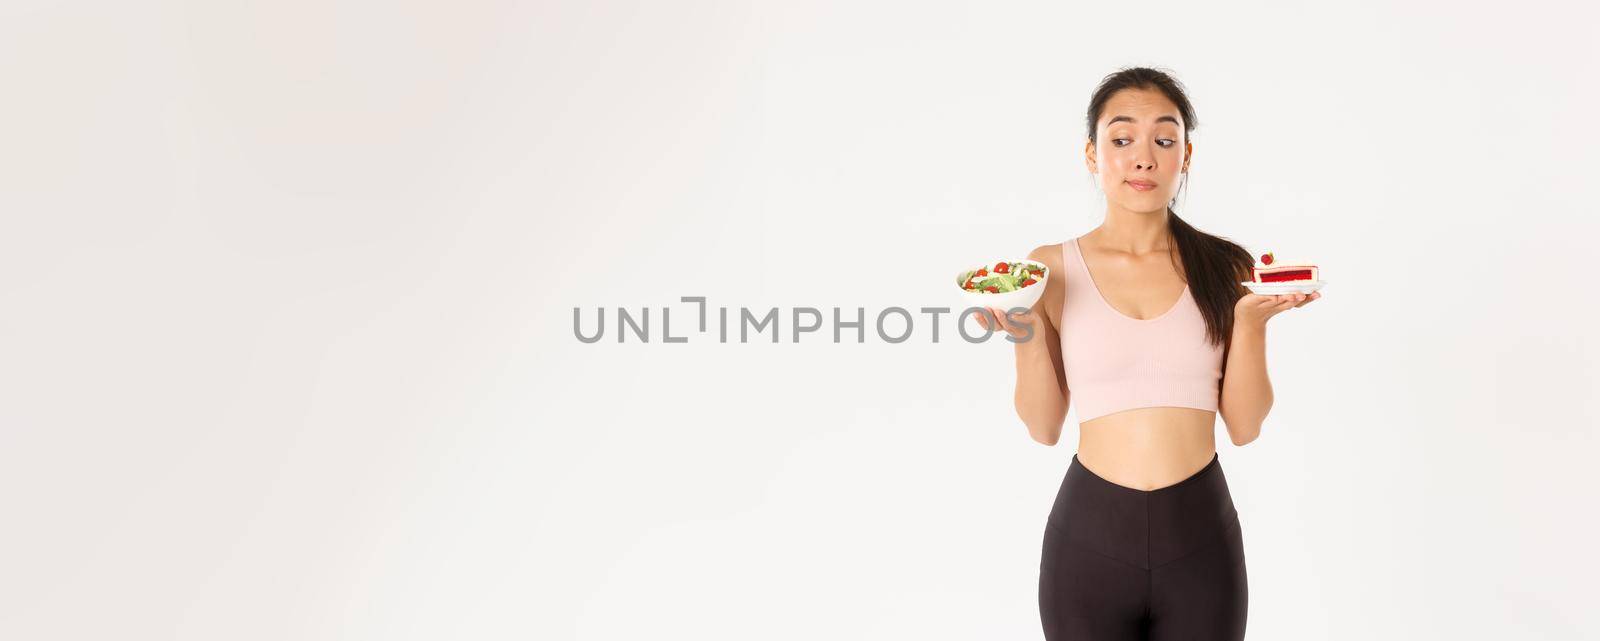 Active lifestyle, fitness and wellbeing concept. Indecisive cute asian slim girl in workout outfit, holding healthy salad and cake, hesitating, need stay on diet, losing weight, white background.